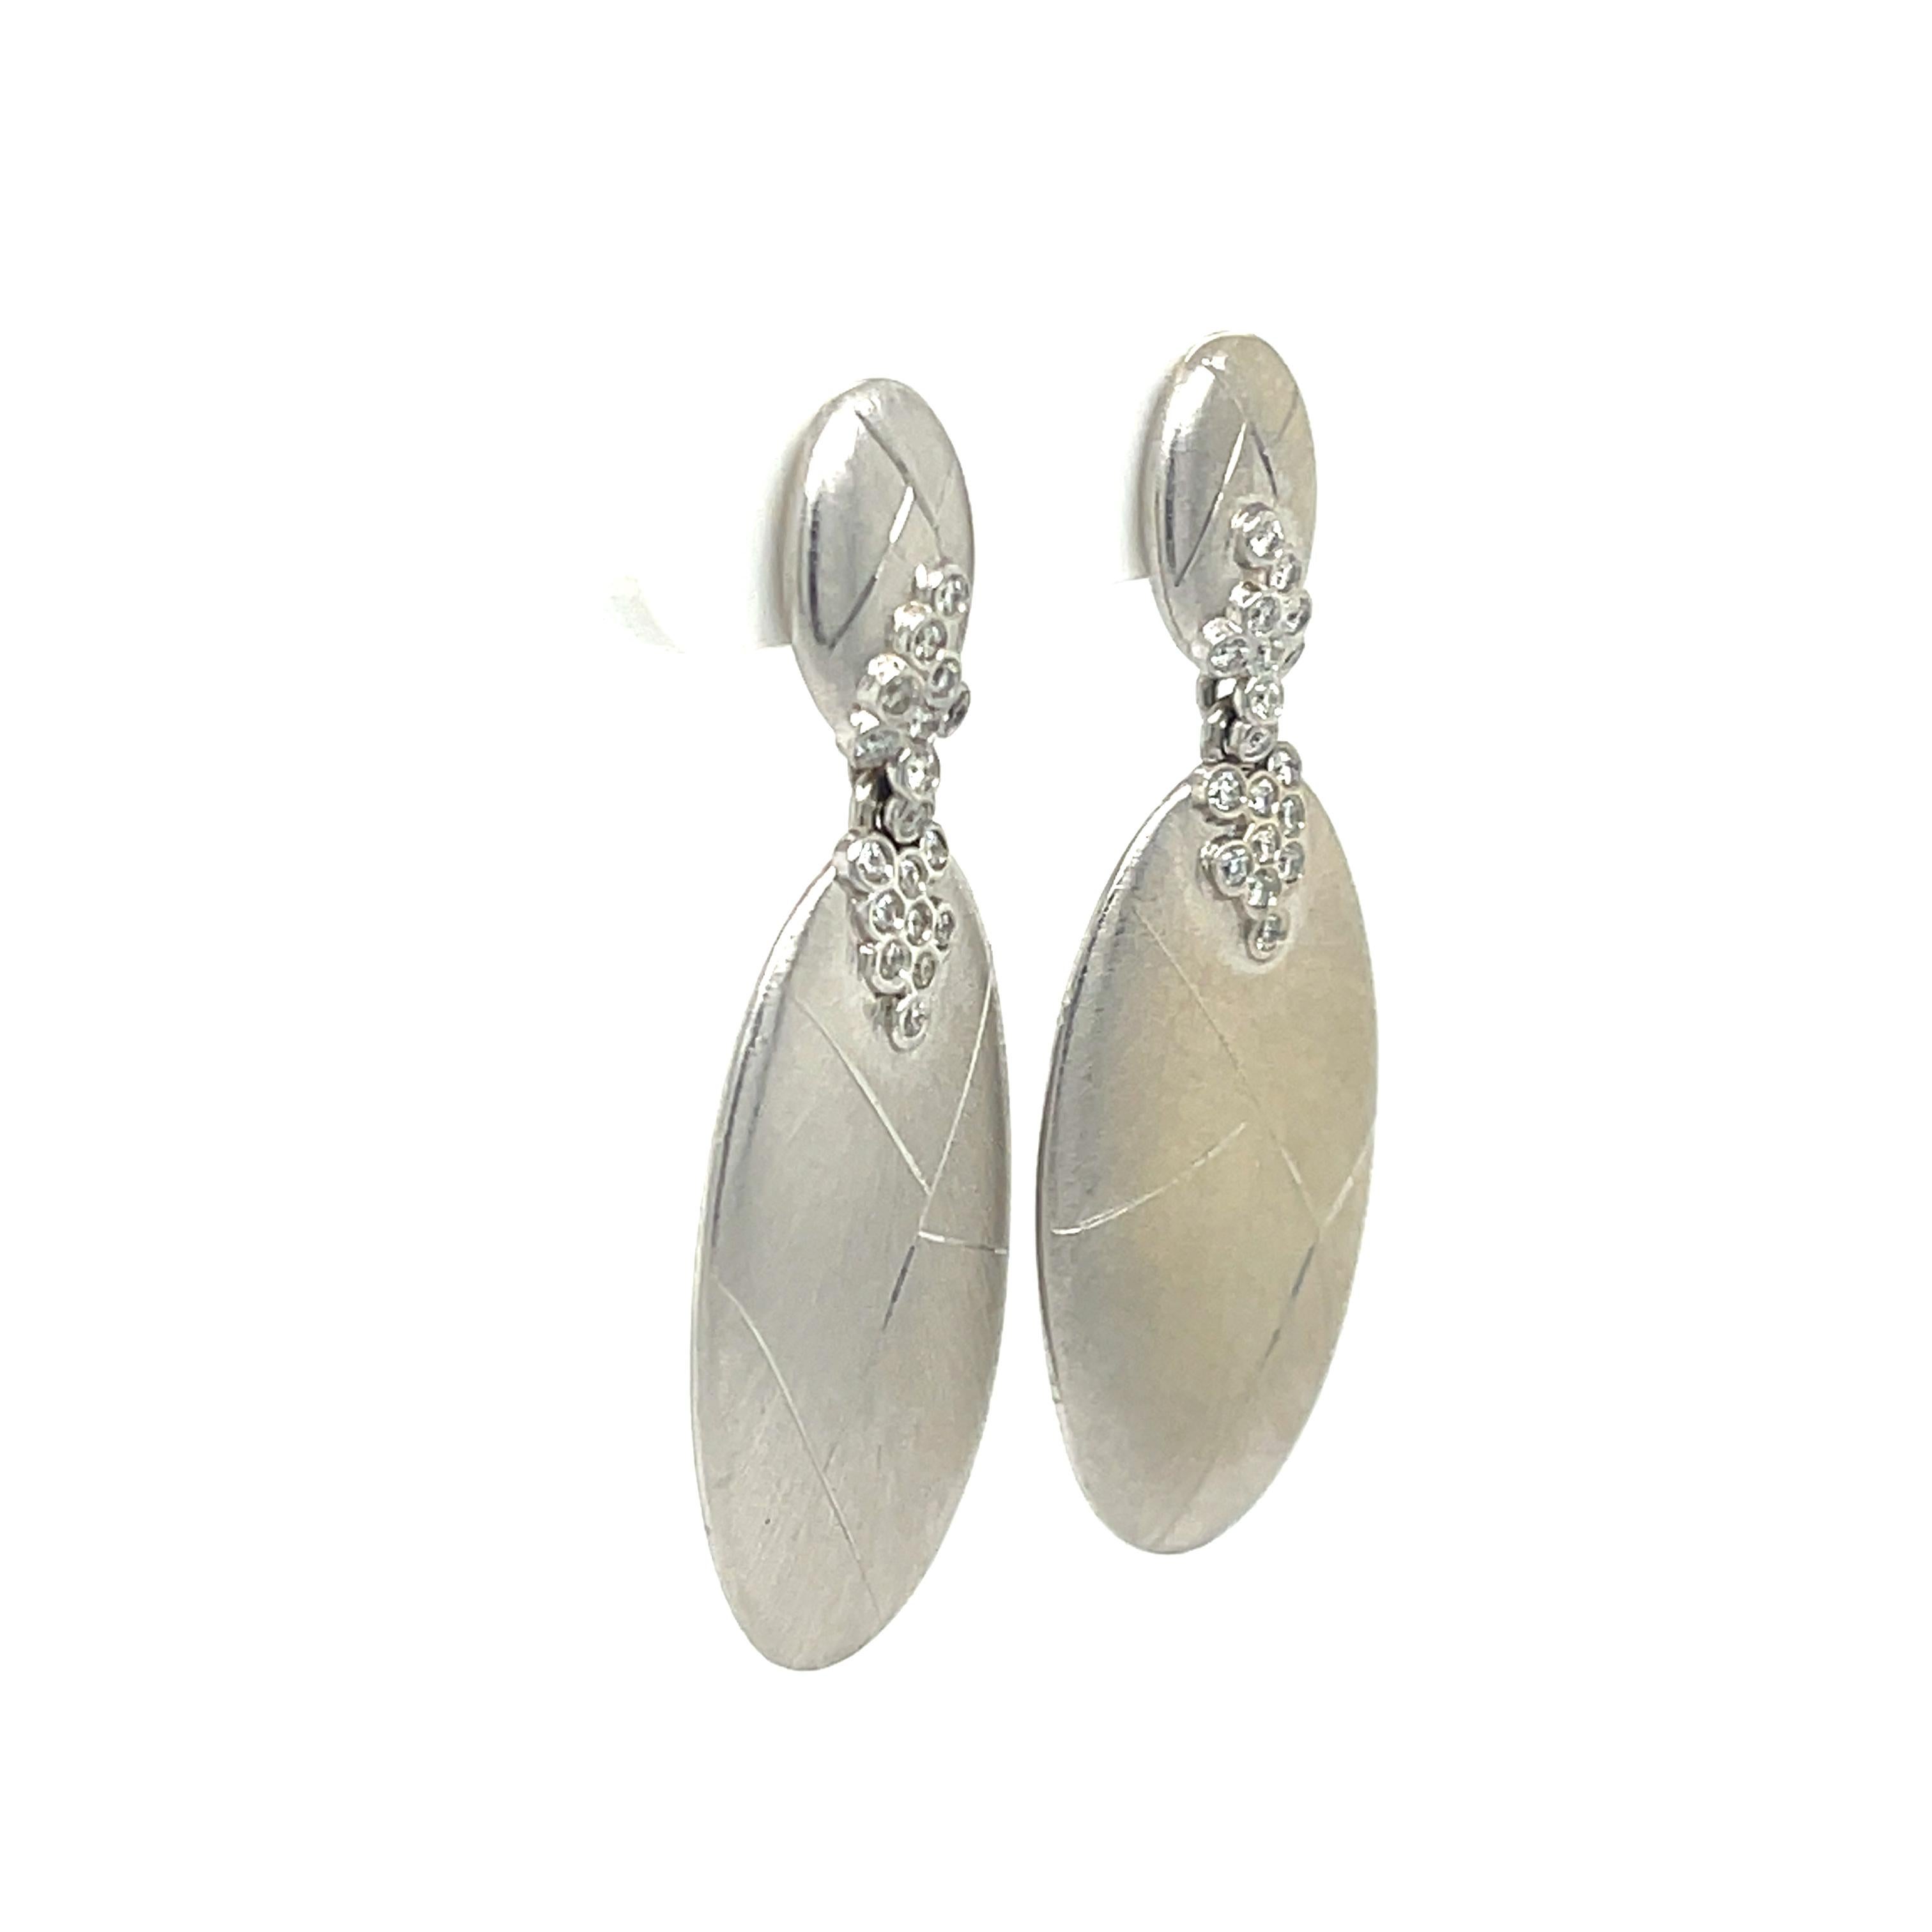 Satin Oval Dangle Earrings in 18K White Gold, The earrings feature 36 brilliant round cut diamonds.
1.75